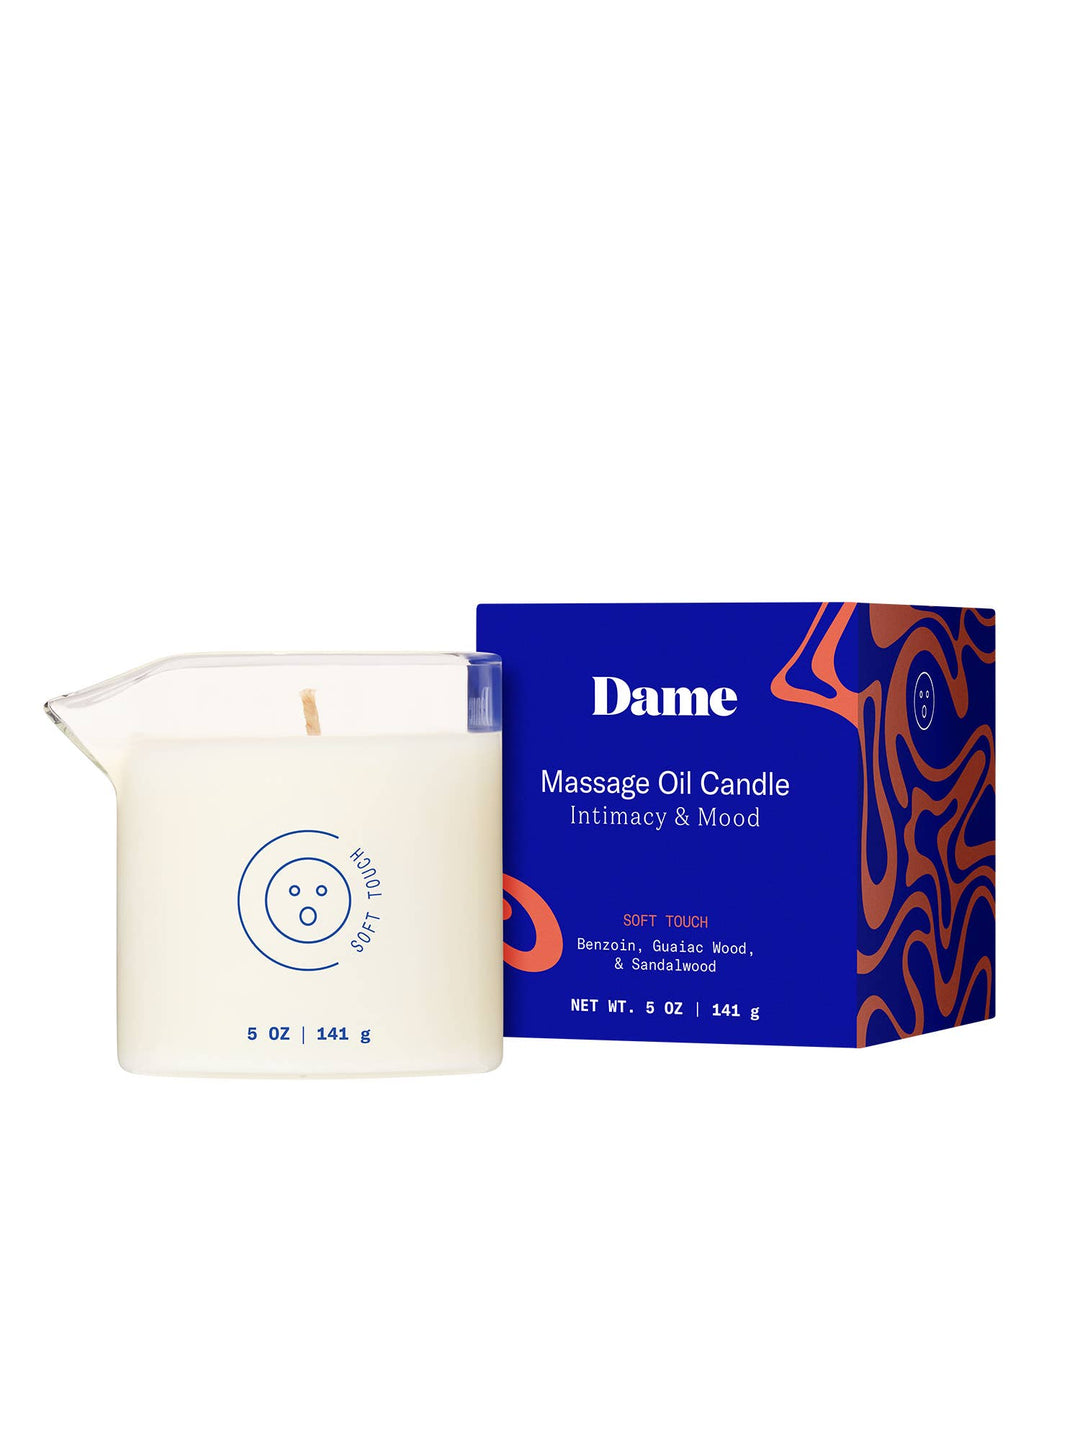 Dame Products - Massage Oil Candle